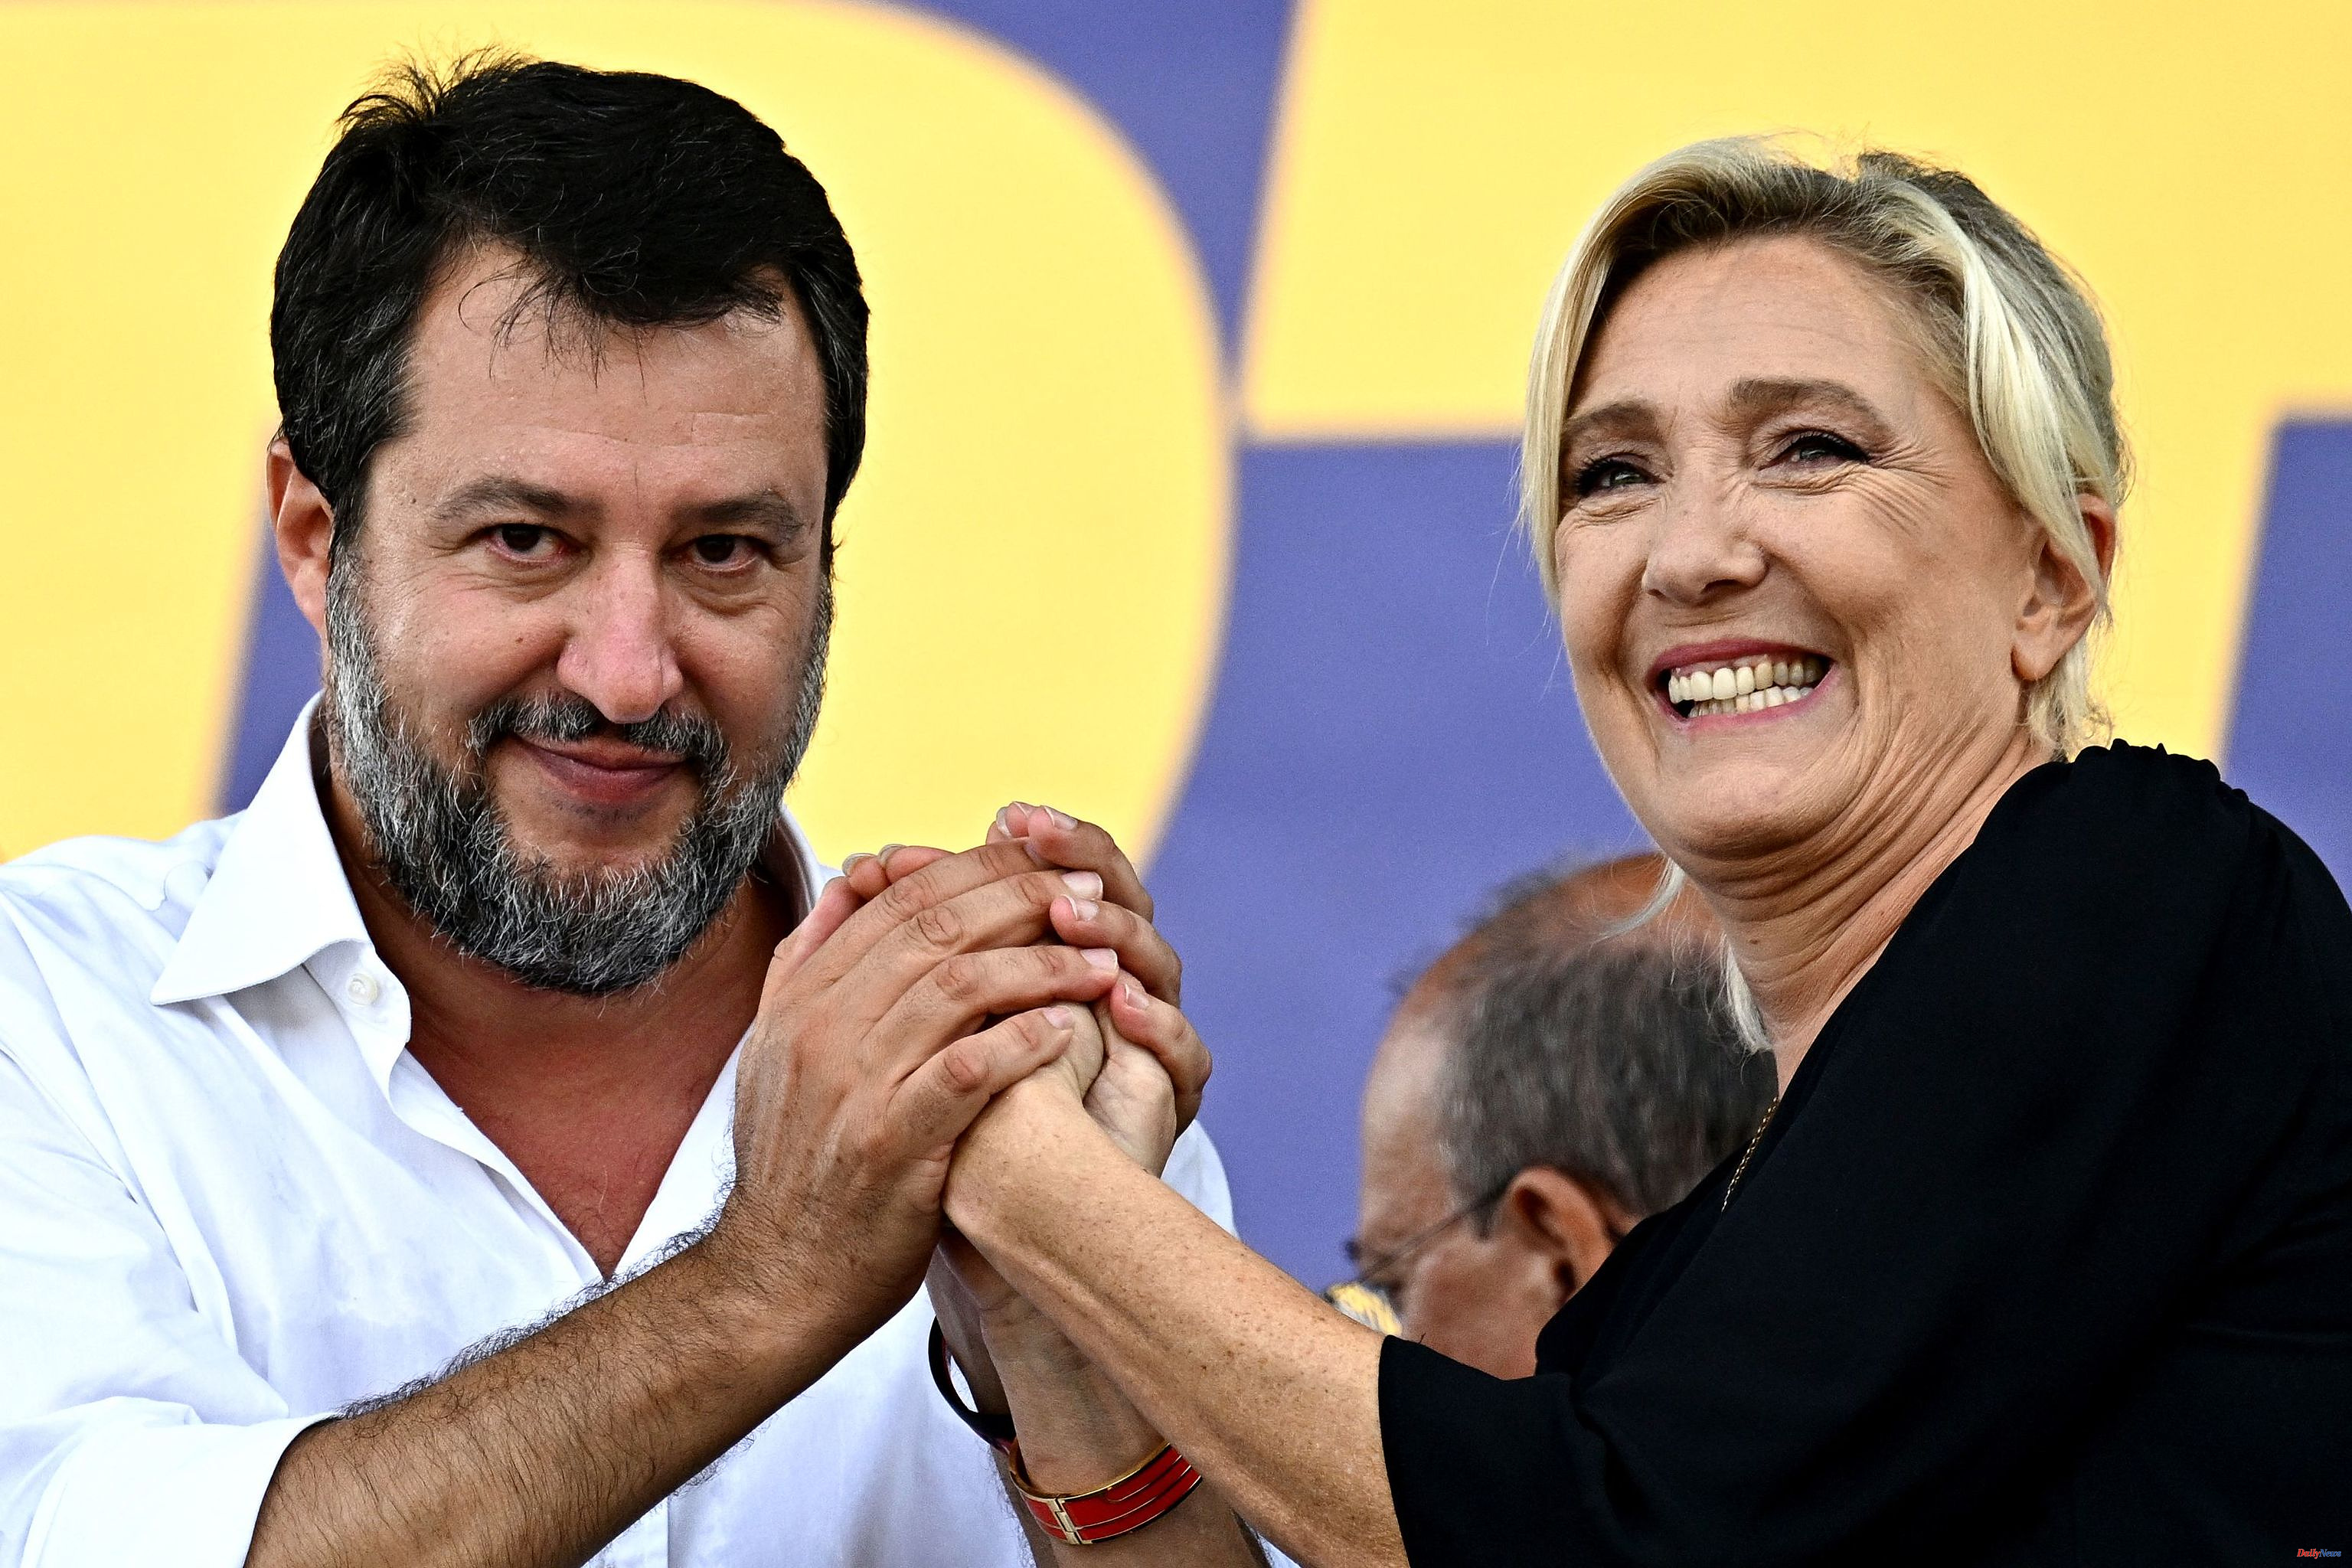 Europe Salvini and Le Pen stage their union in Italy before the European elections